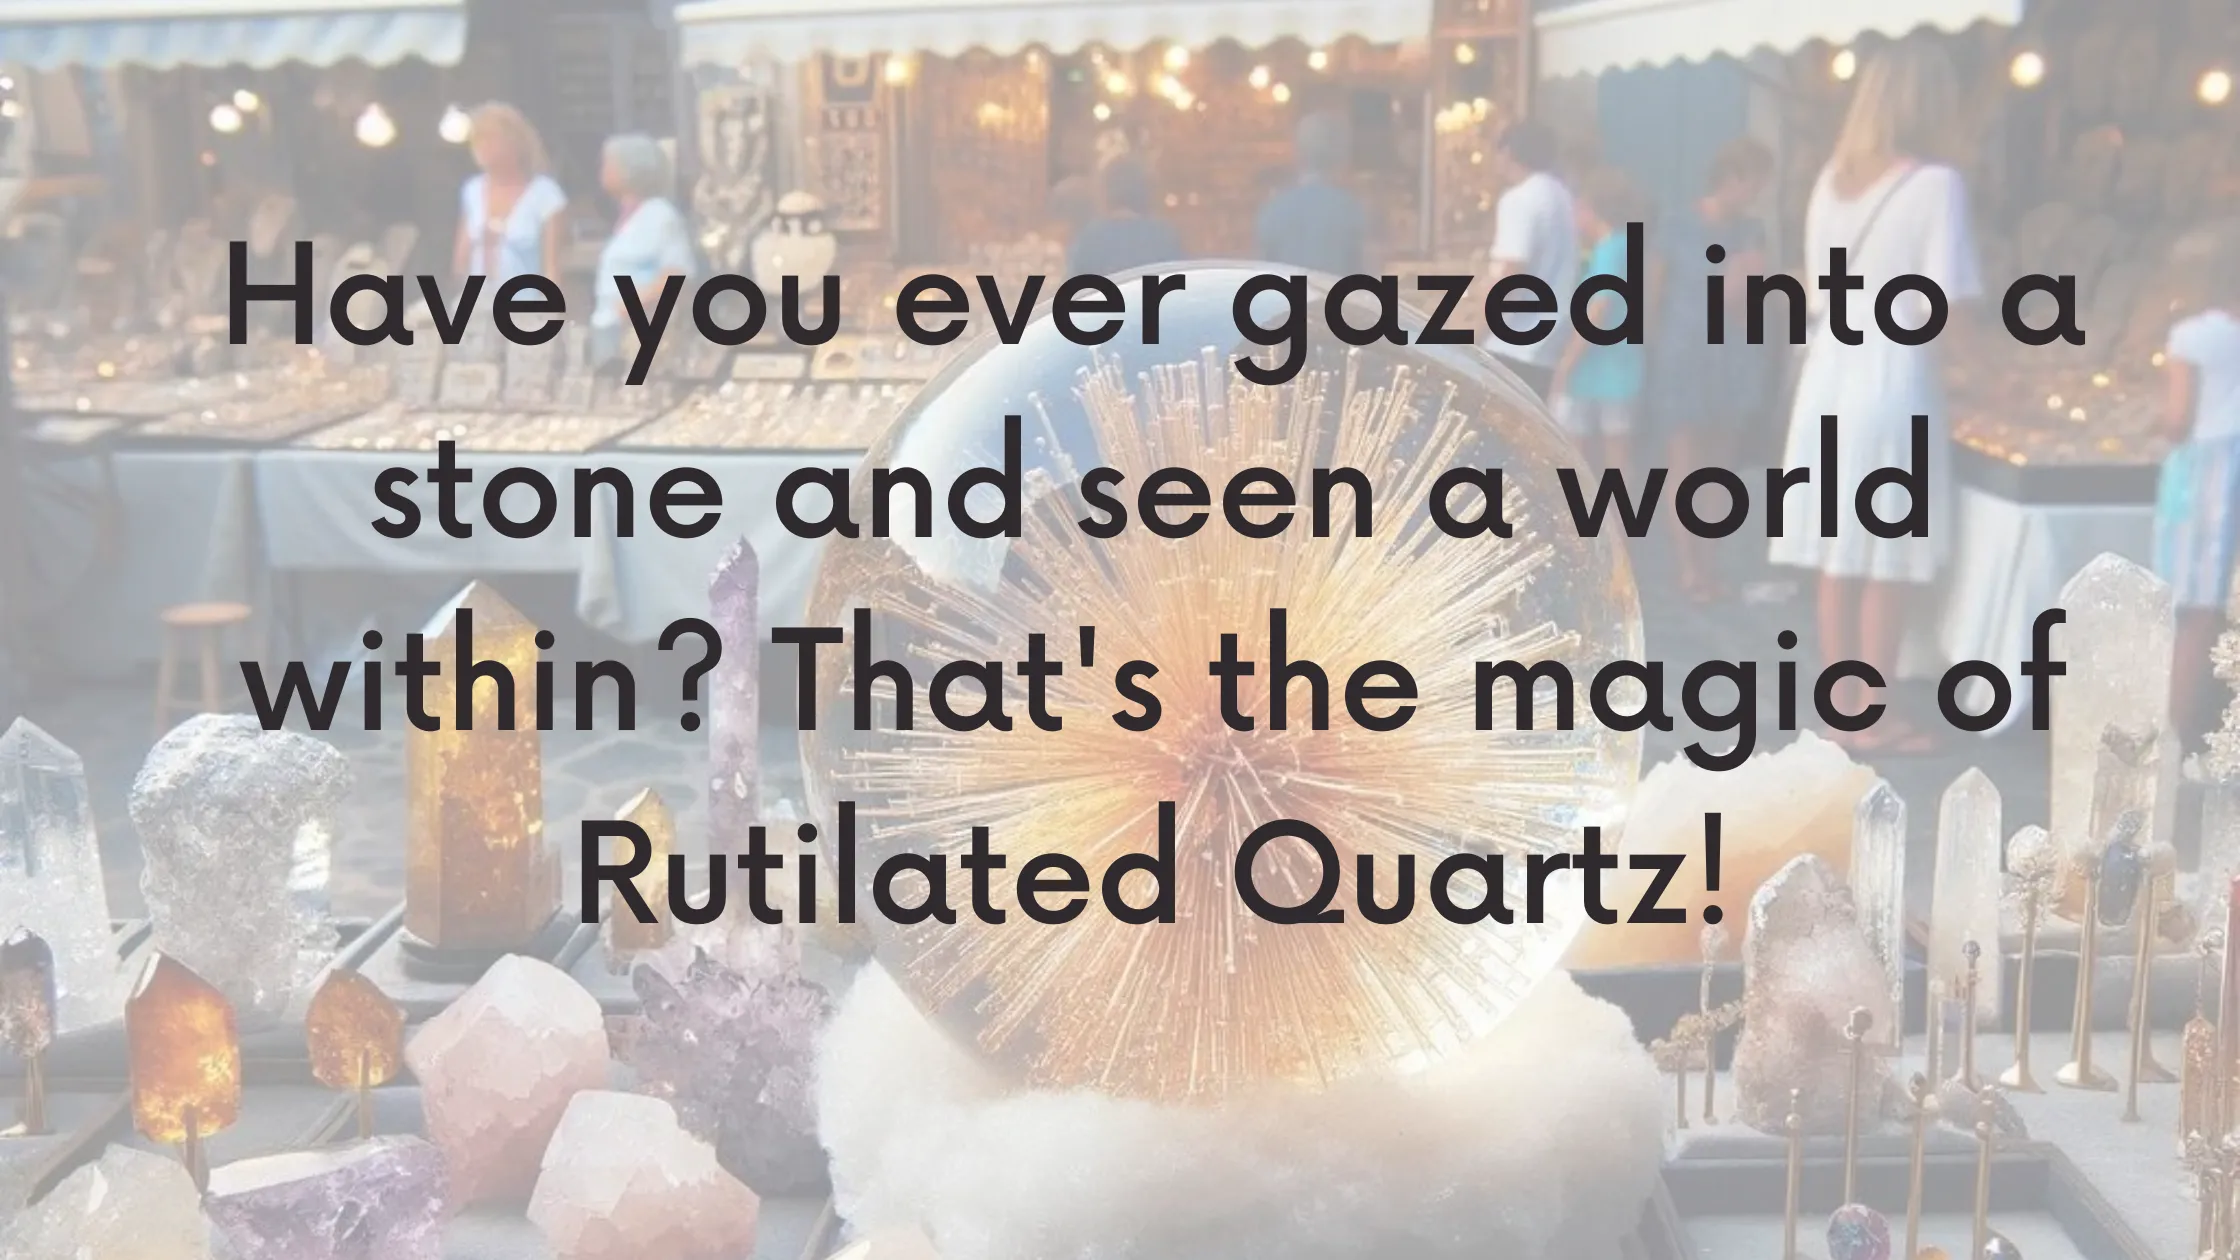 Have you ever gazed into a stone and seen a world within That's the magic of Rutilated Quartz!